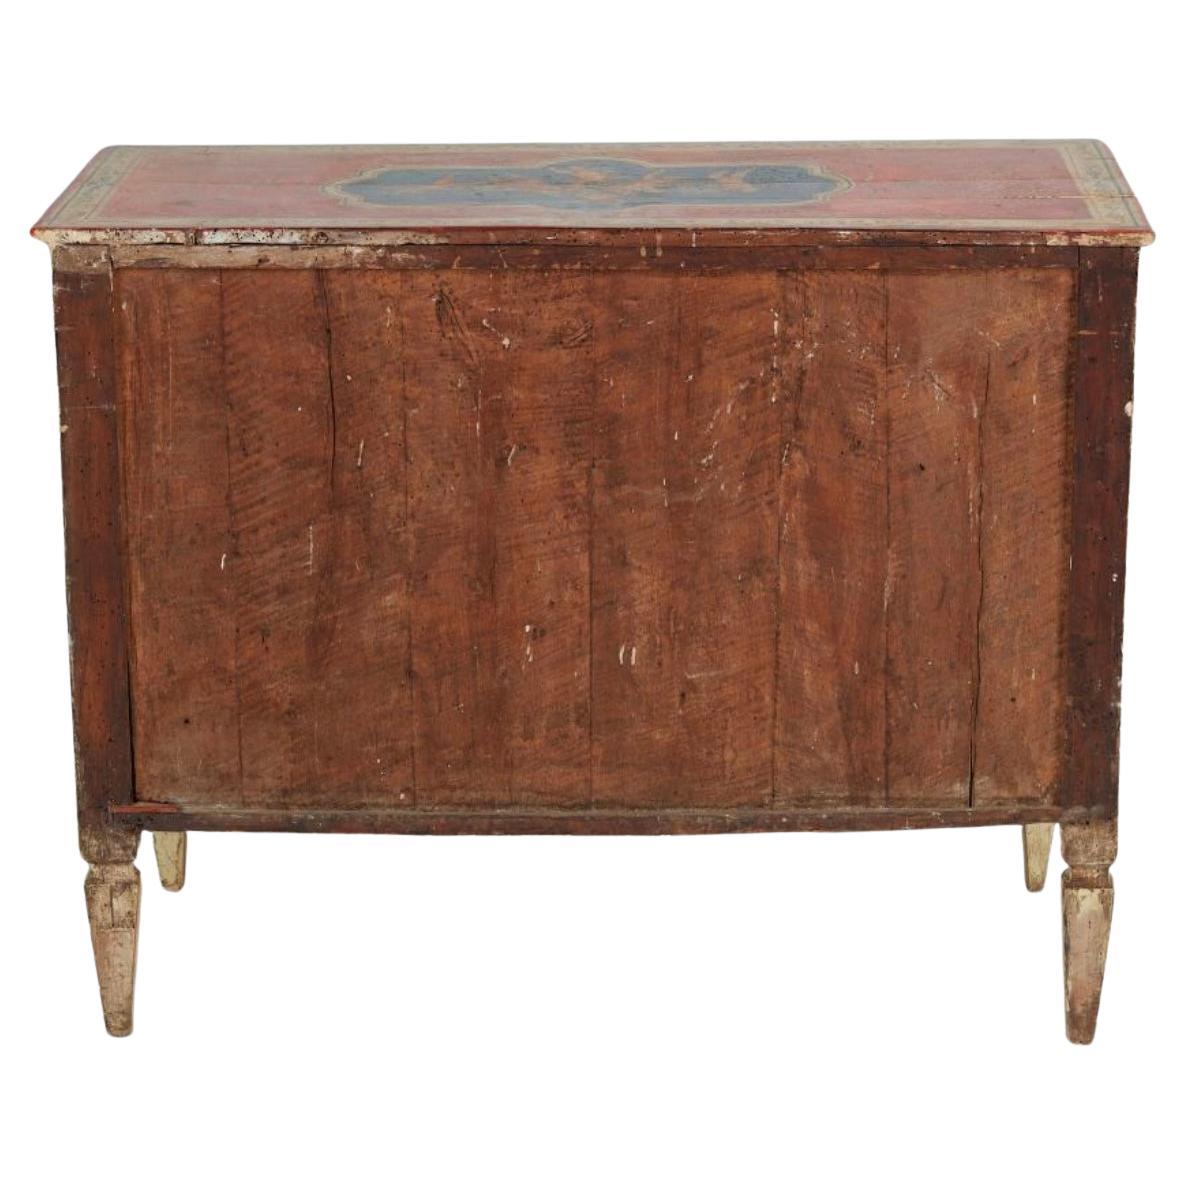 18th Century Italian Neoclassical Polychrome Decorated Commode For Sale 3